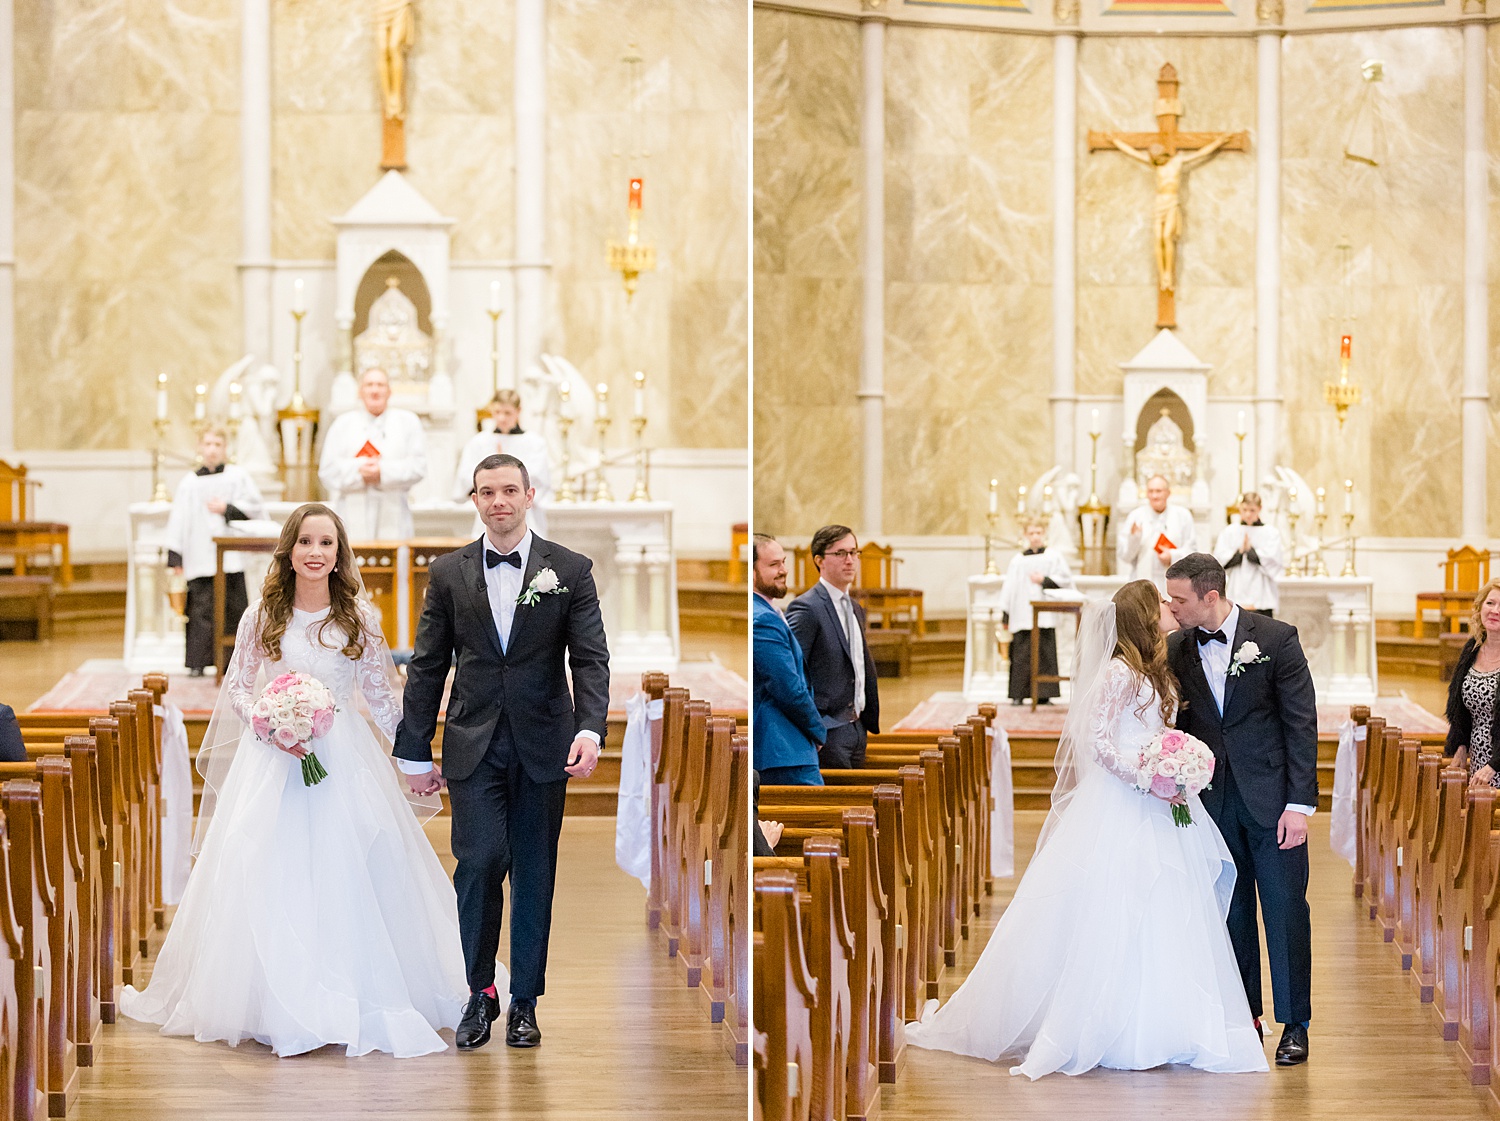 newlyweds walk together down aisle after wedding ceremony